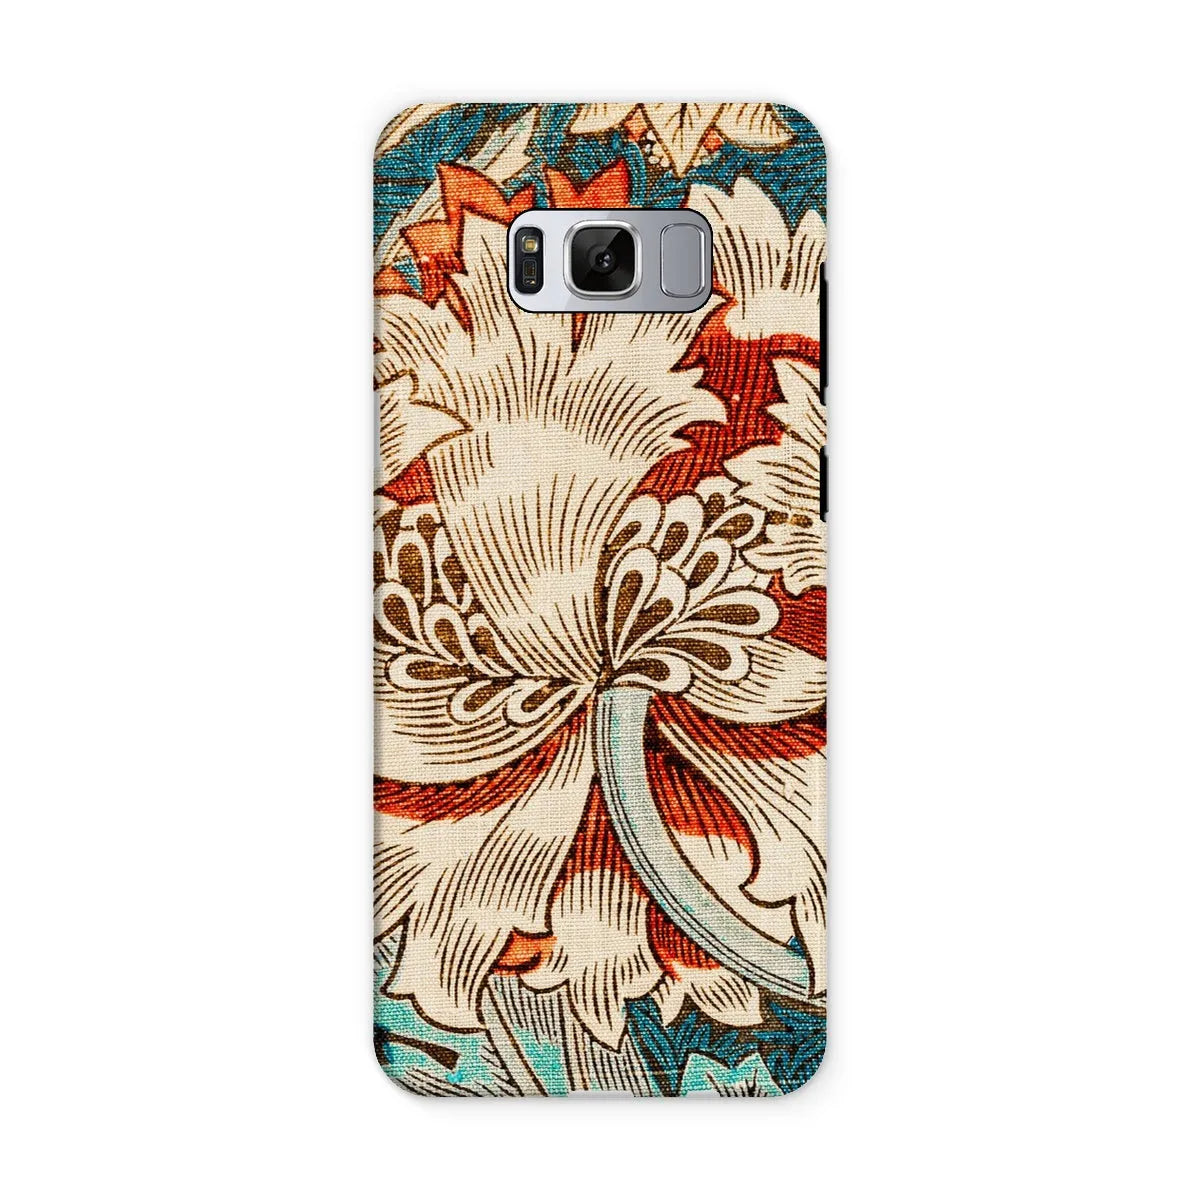 Honeysuckle Too By William Morris Phone Case - Samsung Galaxy S8 / Matte - Mobile Phone Cases - Aesthetic Art